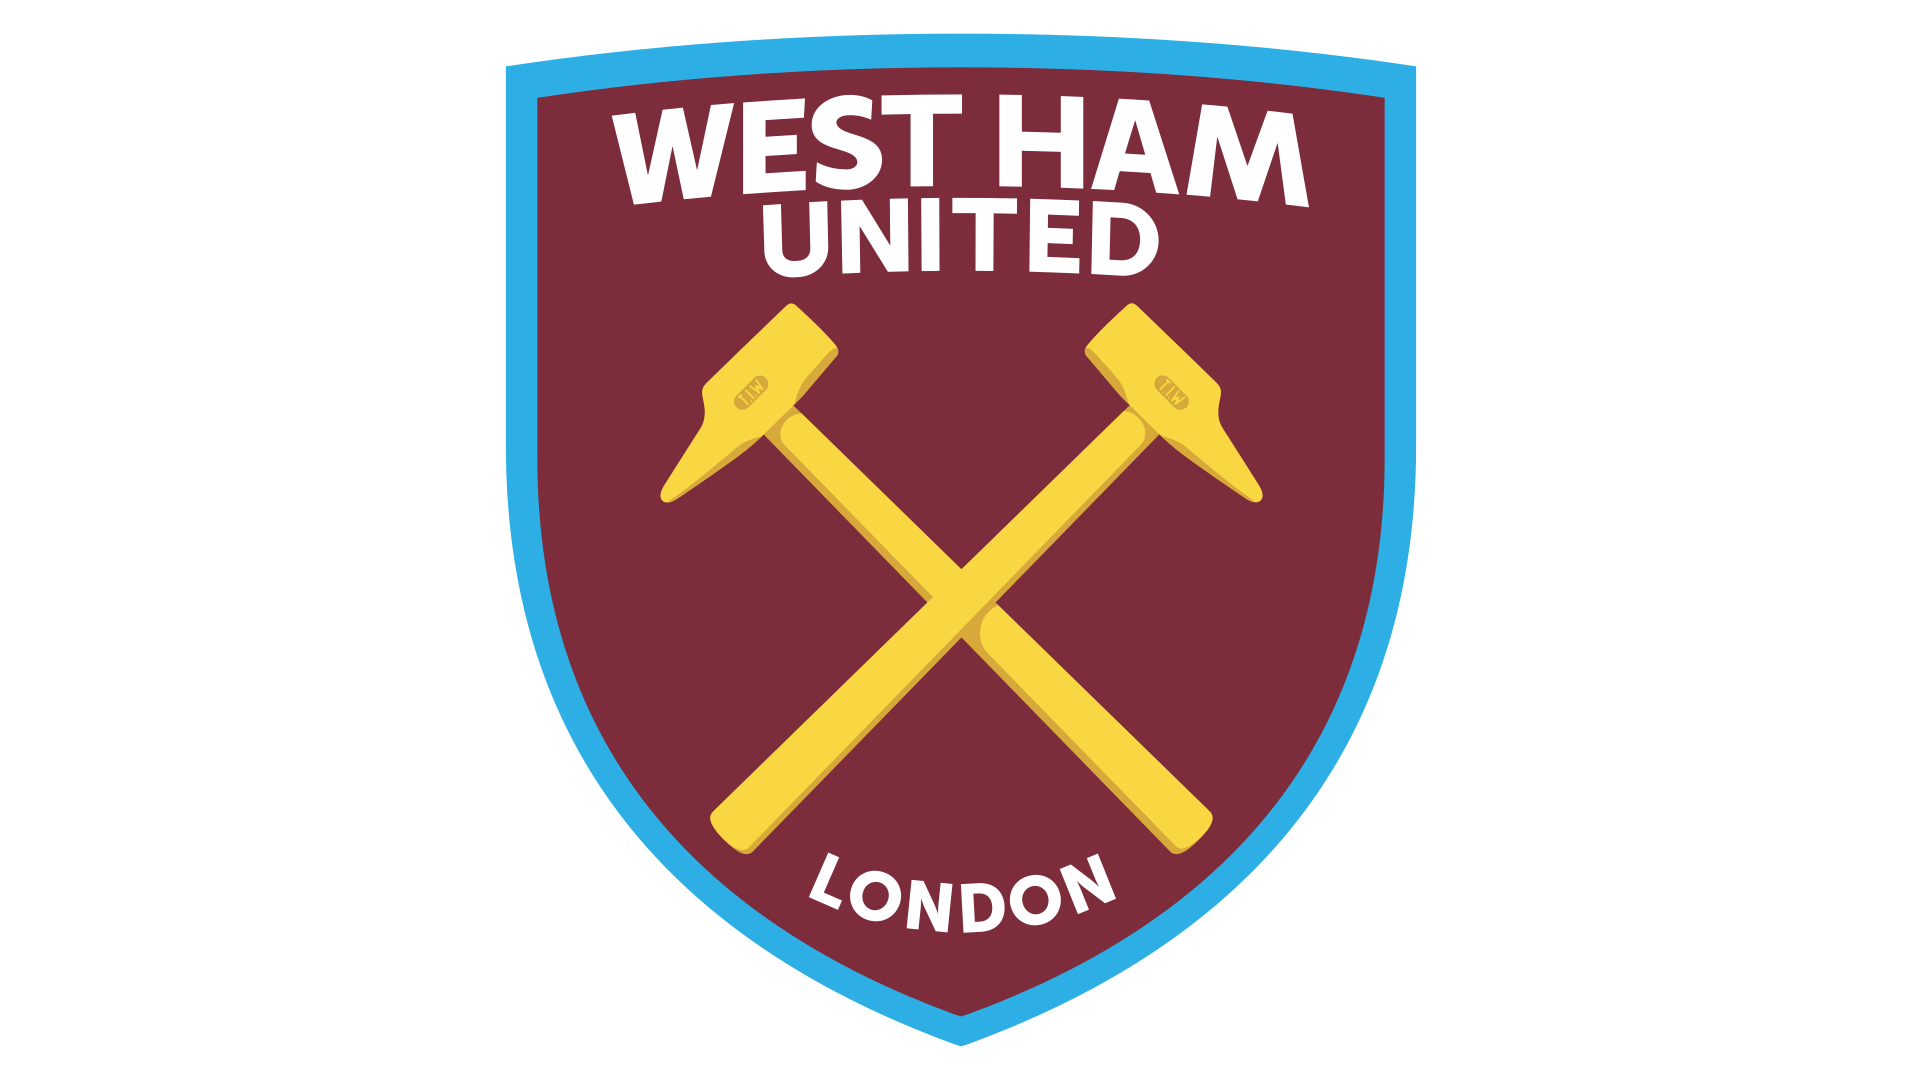 West Ham United Logo - West Ham United logo, West Ham United Symbol, Meaning, History and ...